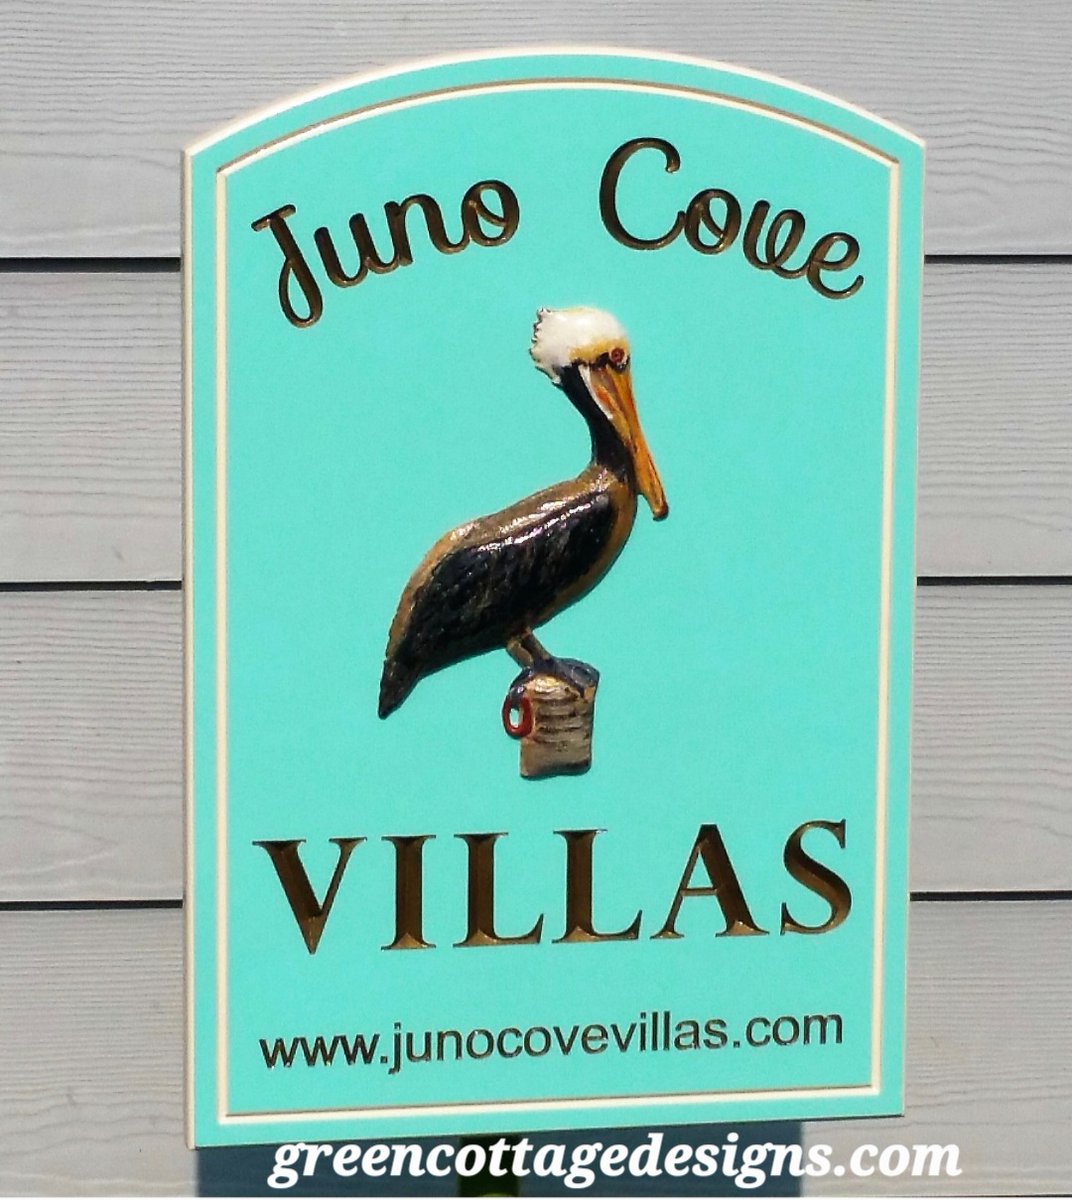 Luxury Vacation House Signs Property ID Plaque Curb Appeal Signs Logo Villas Resort by greencottagedesigns.com #PineappleGrove #CoconutGrove #customsigns #luxurytravel